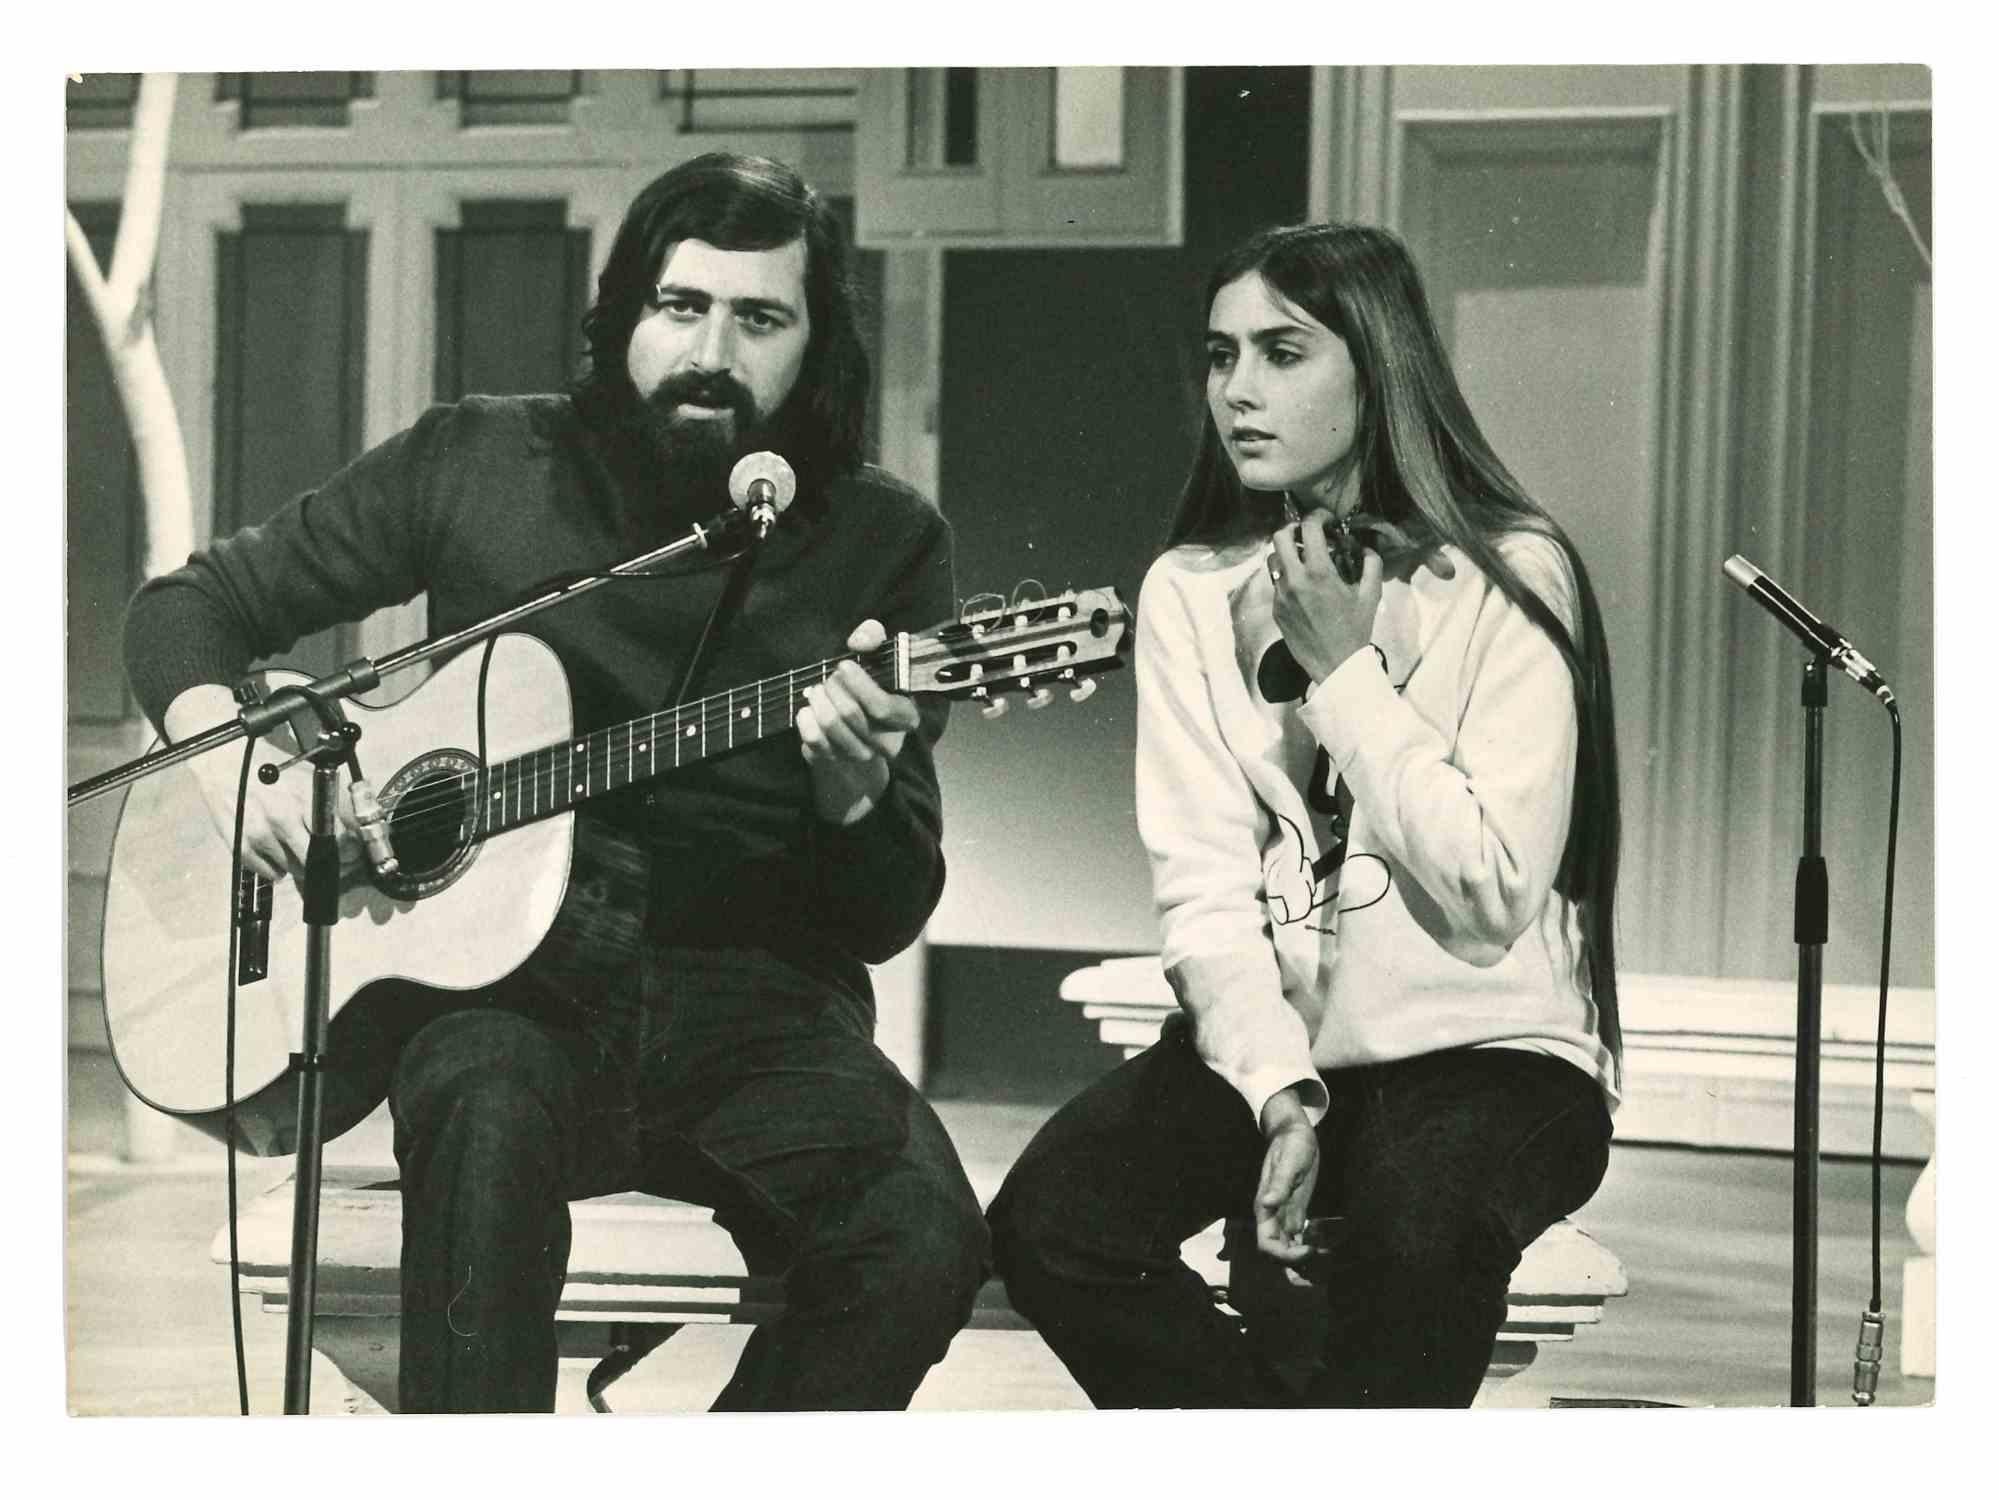 Unknown Portrait Photograph - Francesco Guccini and Romina Power - Photograph - 1970s